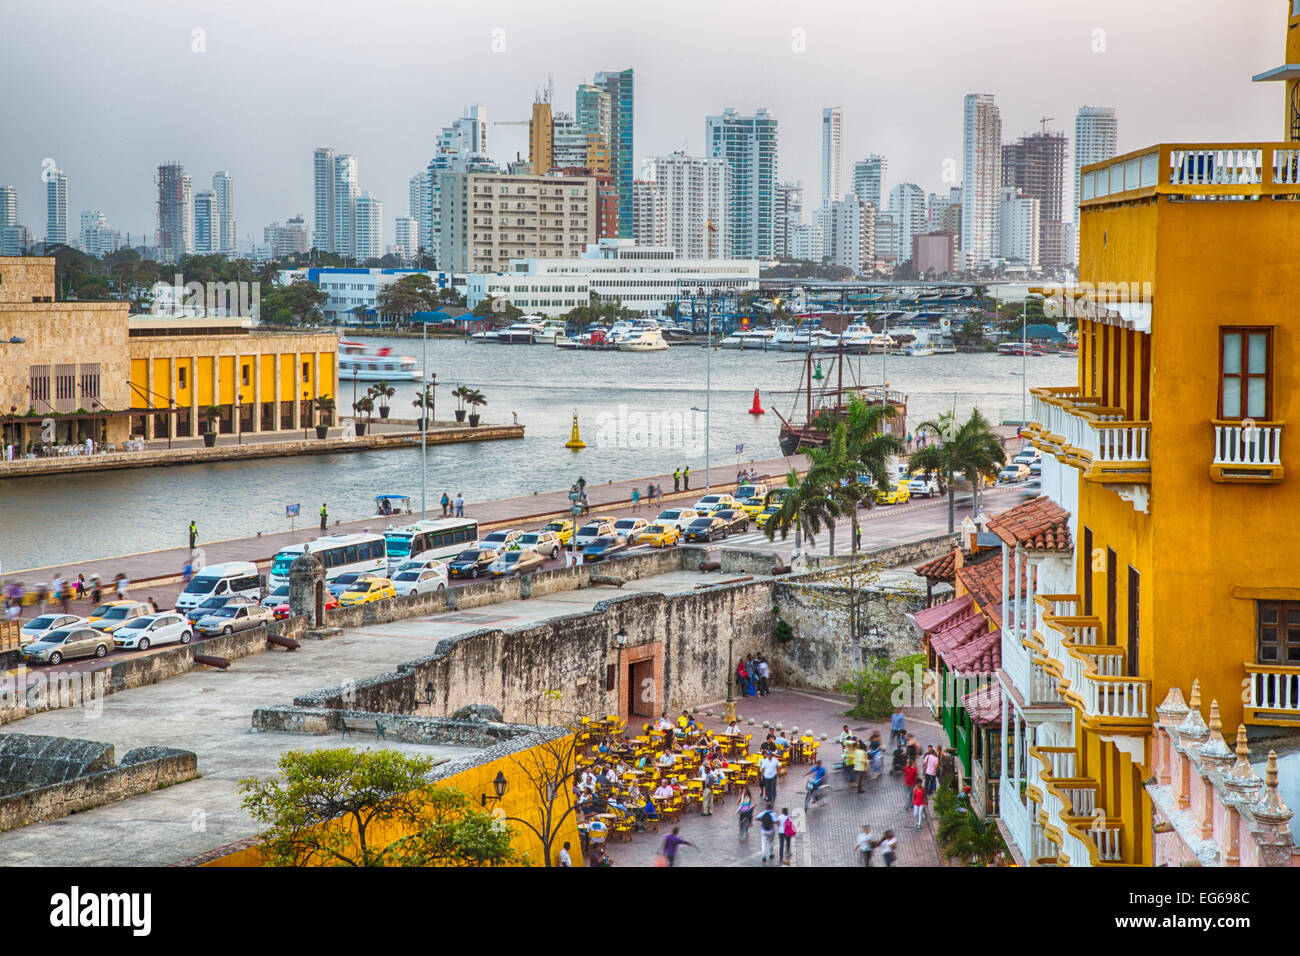 Cartagena, Colombia - February 21st, 2014 - View of the Plaza San Pedro Claver with the Towers of Bocagrande in the background.  Stock Photo